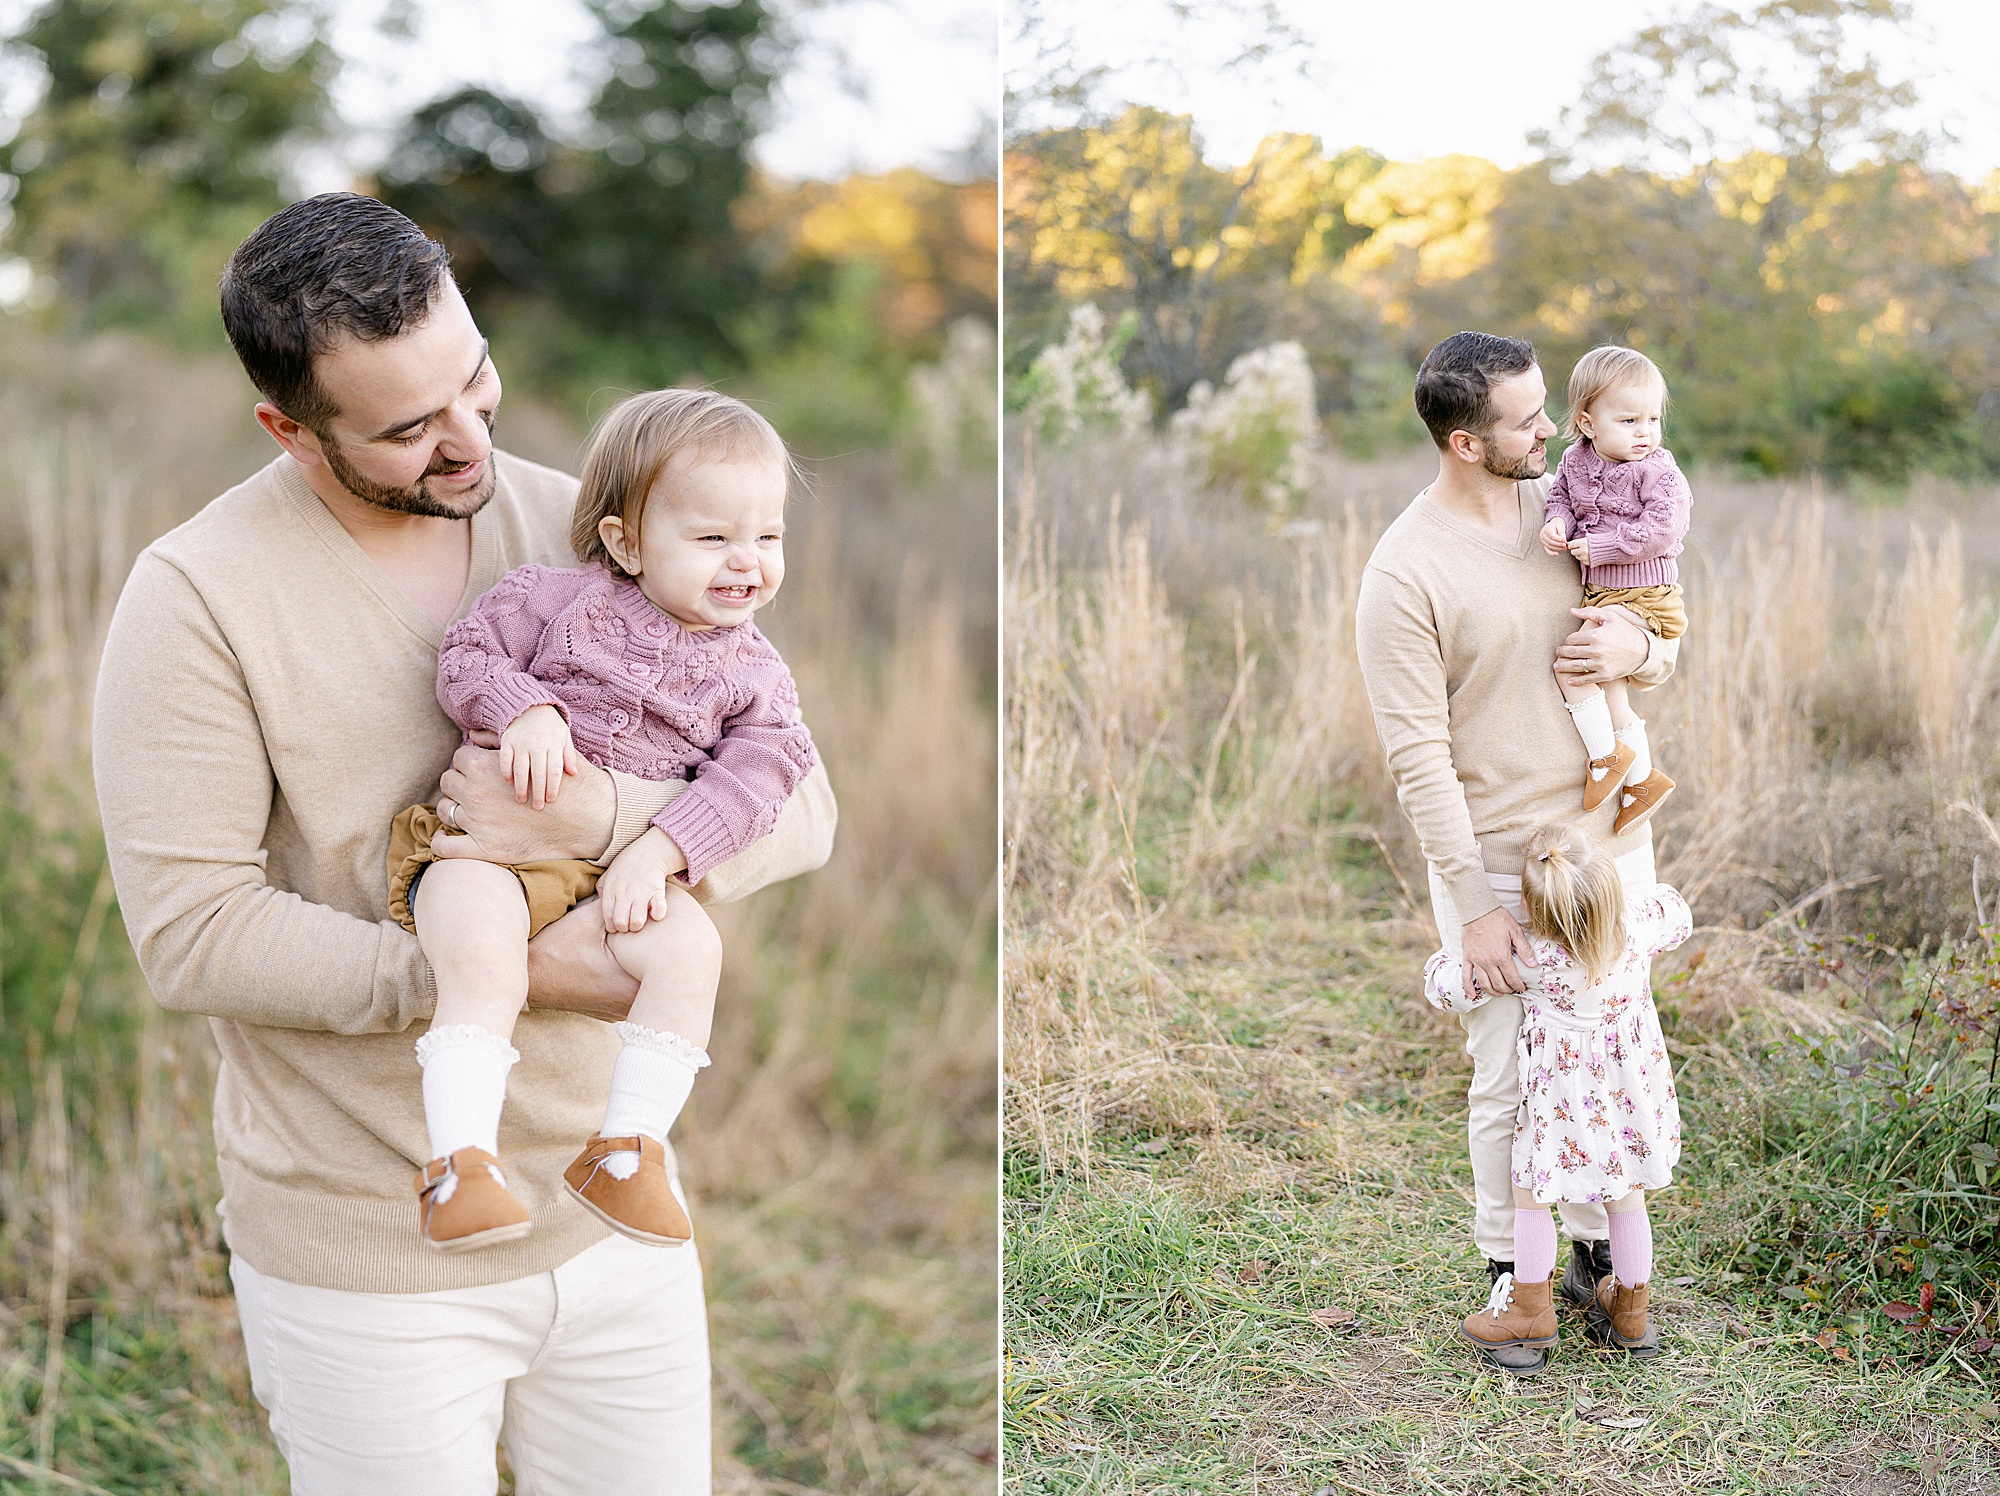 daughters cling to their daddy in this candid family moment